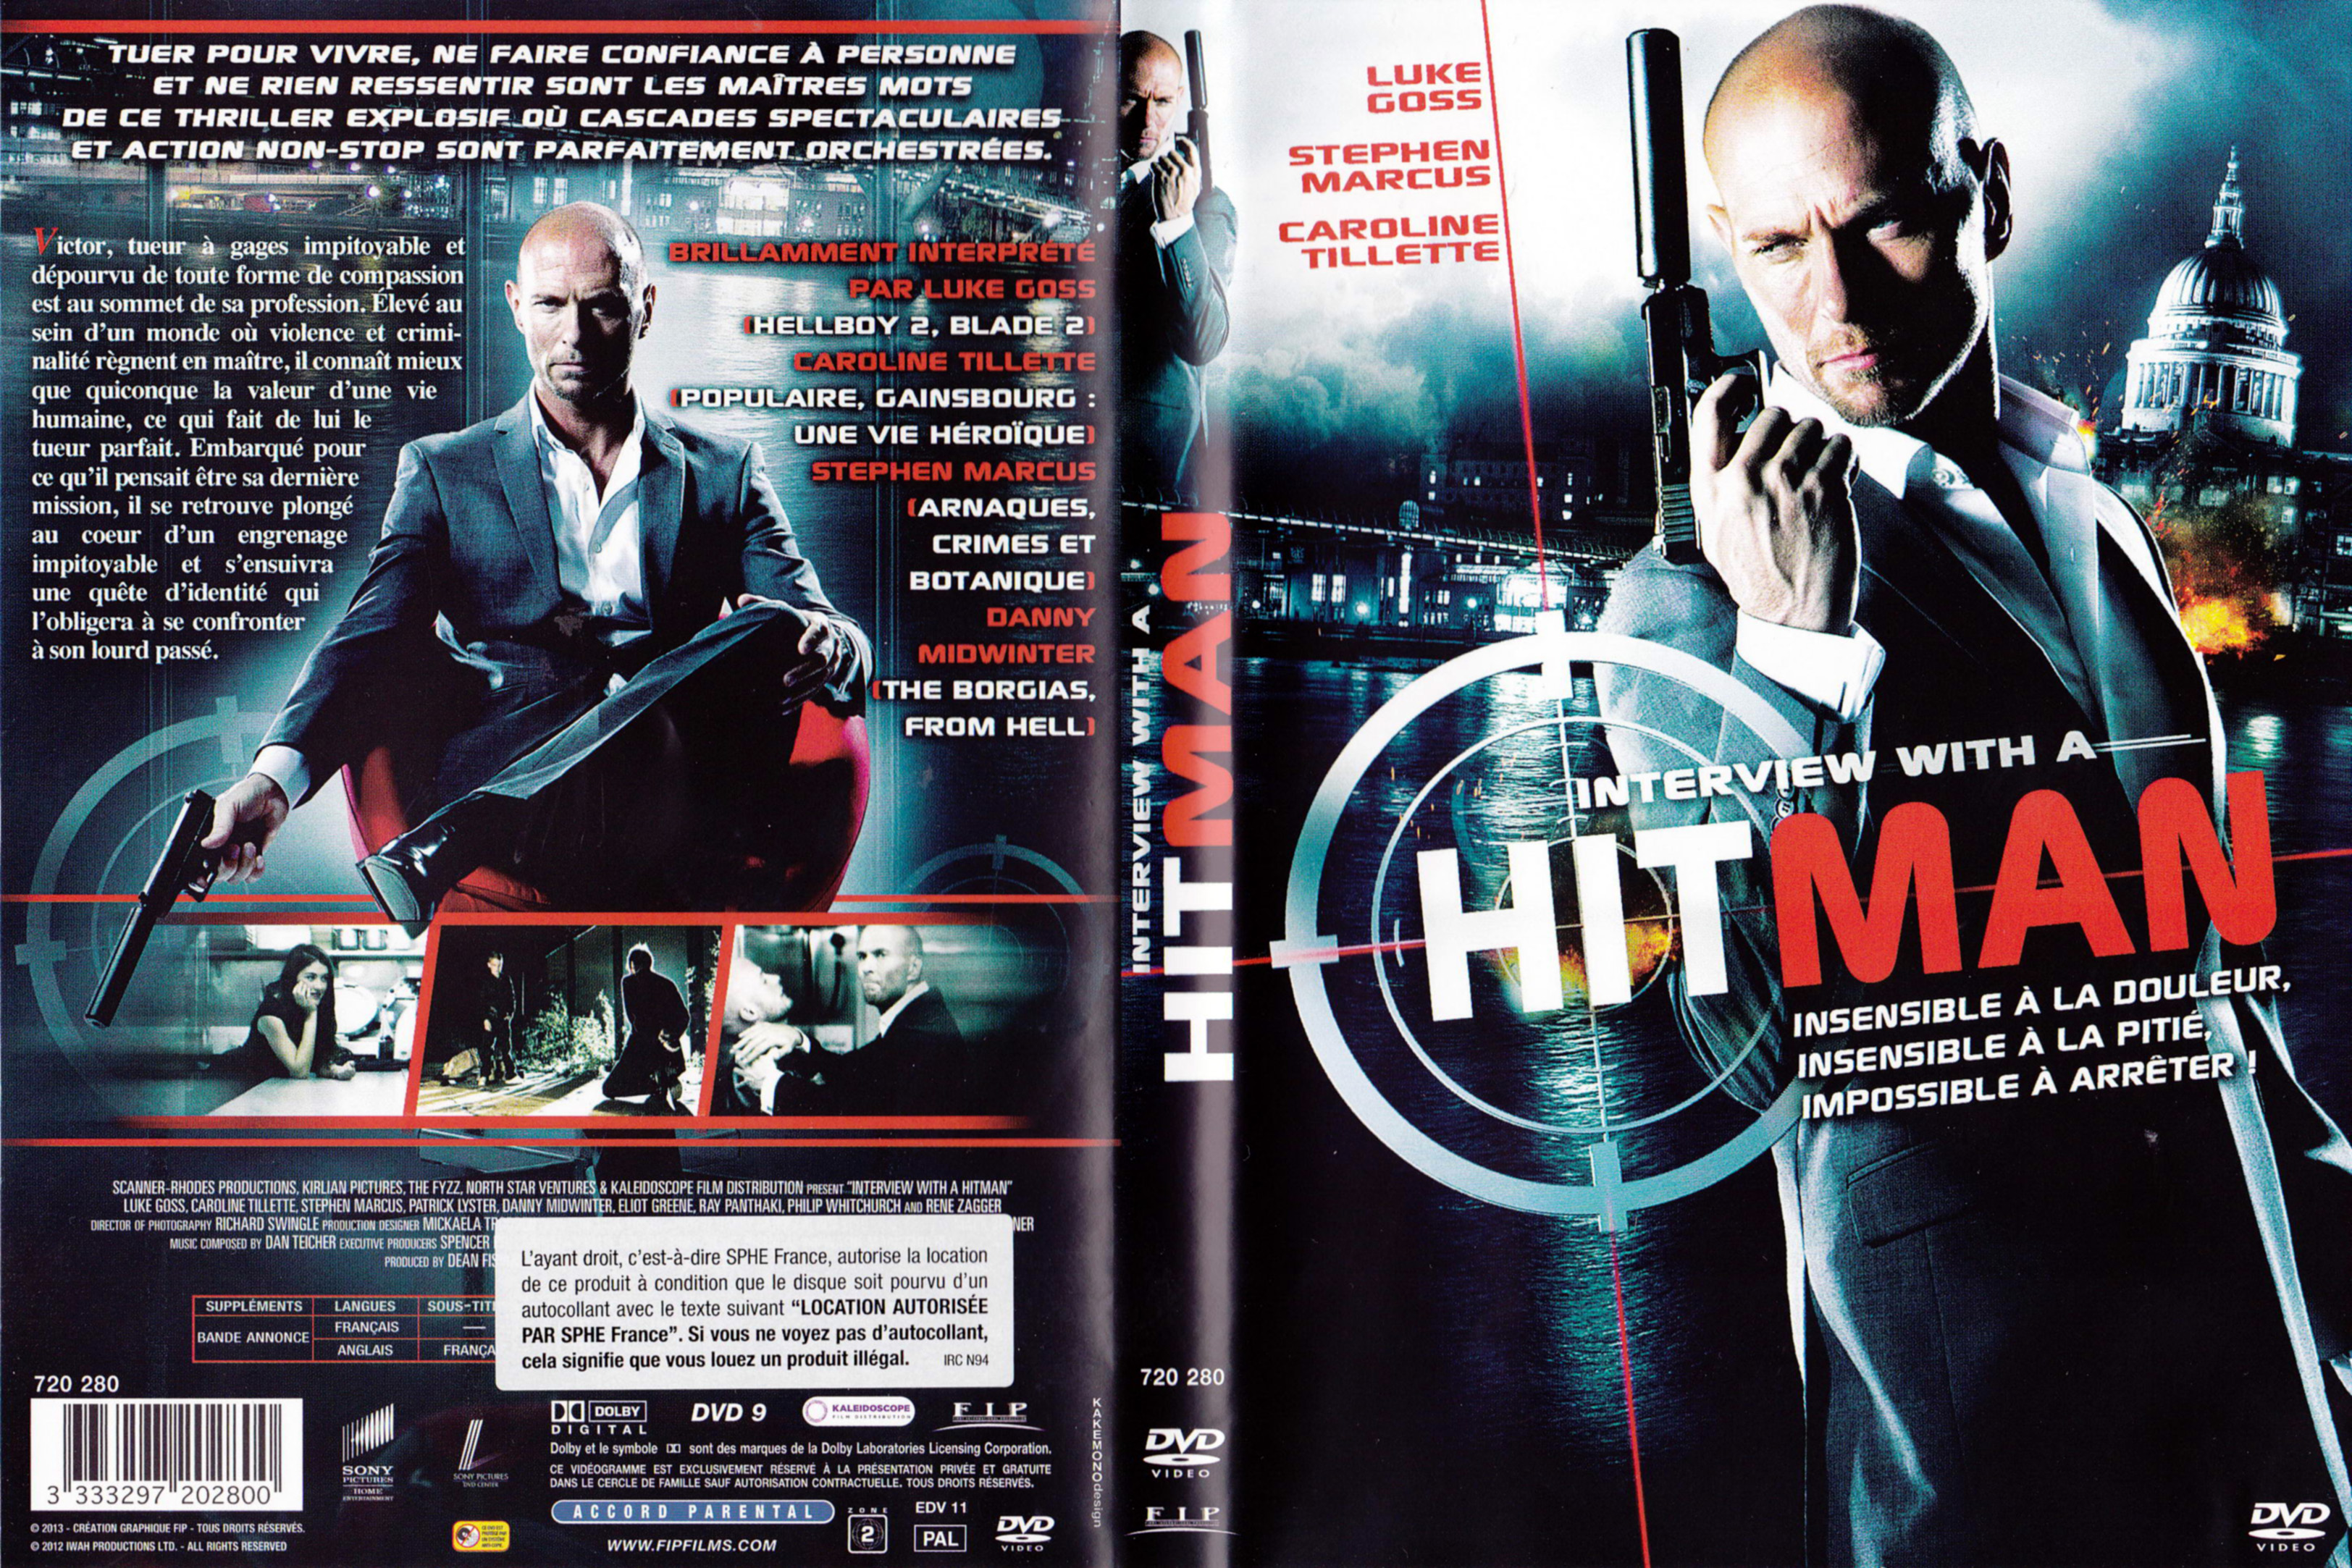 Jaquette DVD Interview with a hitman